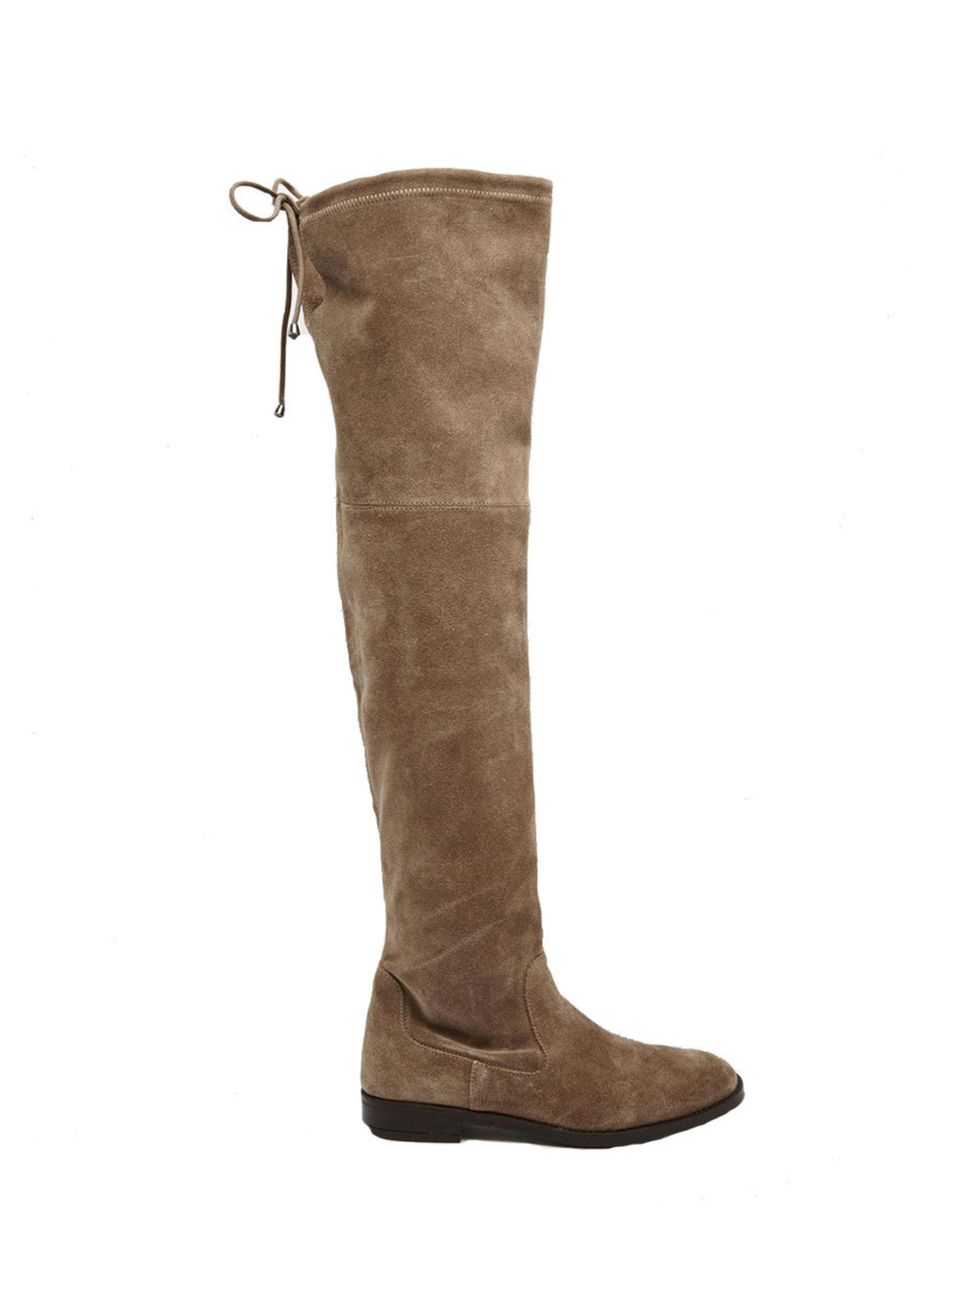 Brown, Boot, Shoe, Tan, Leather, Riding boot, Liver, Beige, Knee-high boot, Motorcycle boot, 